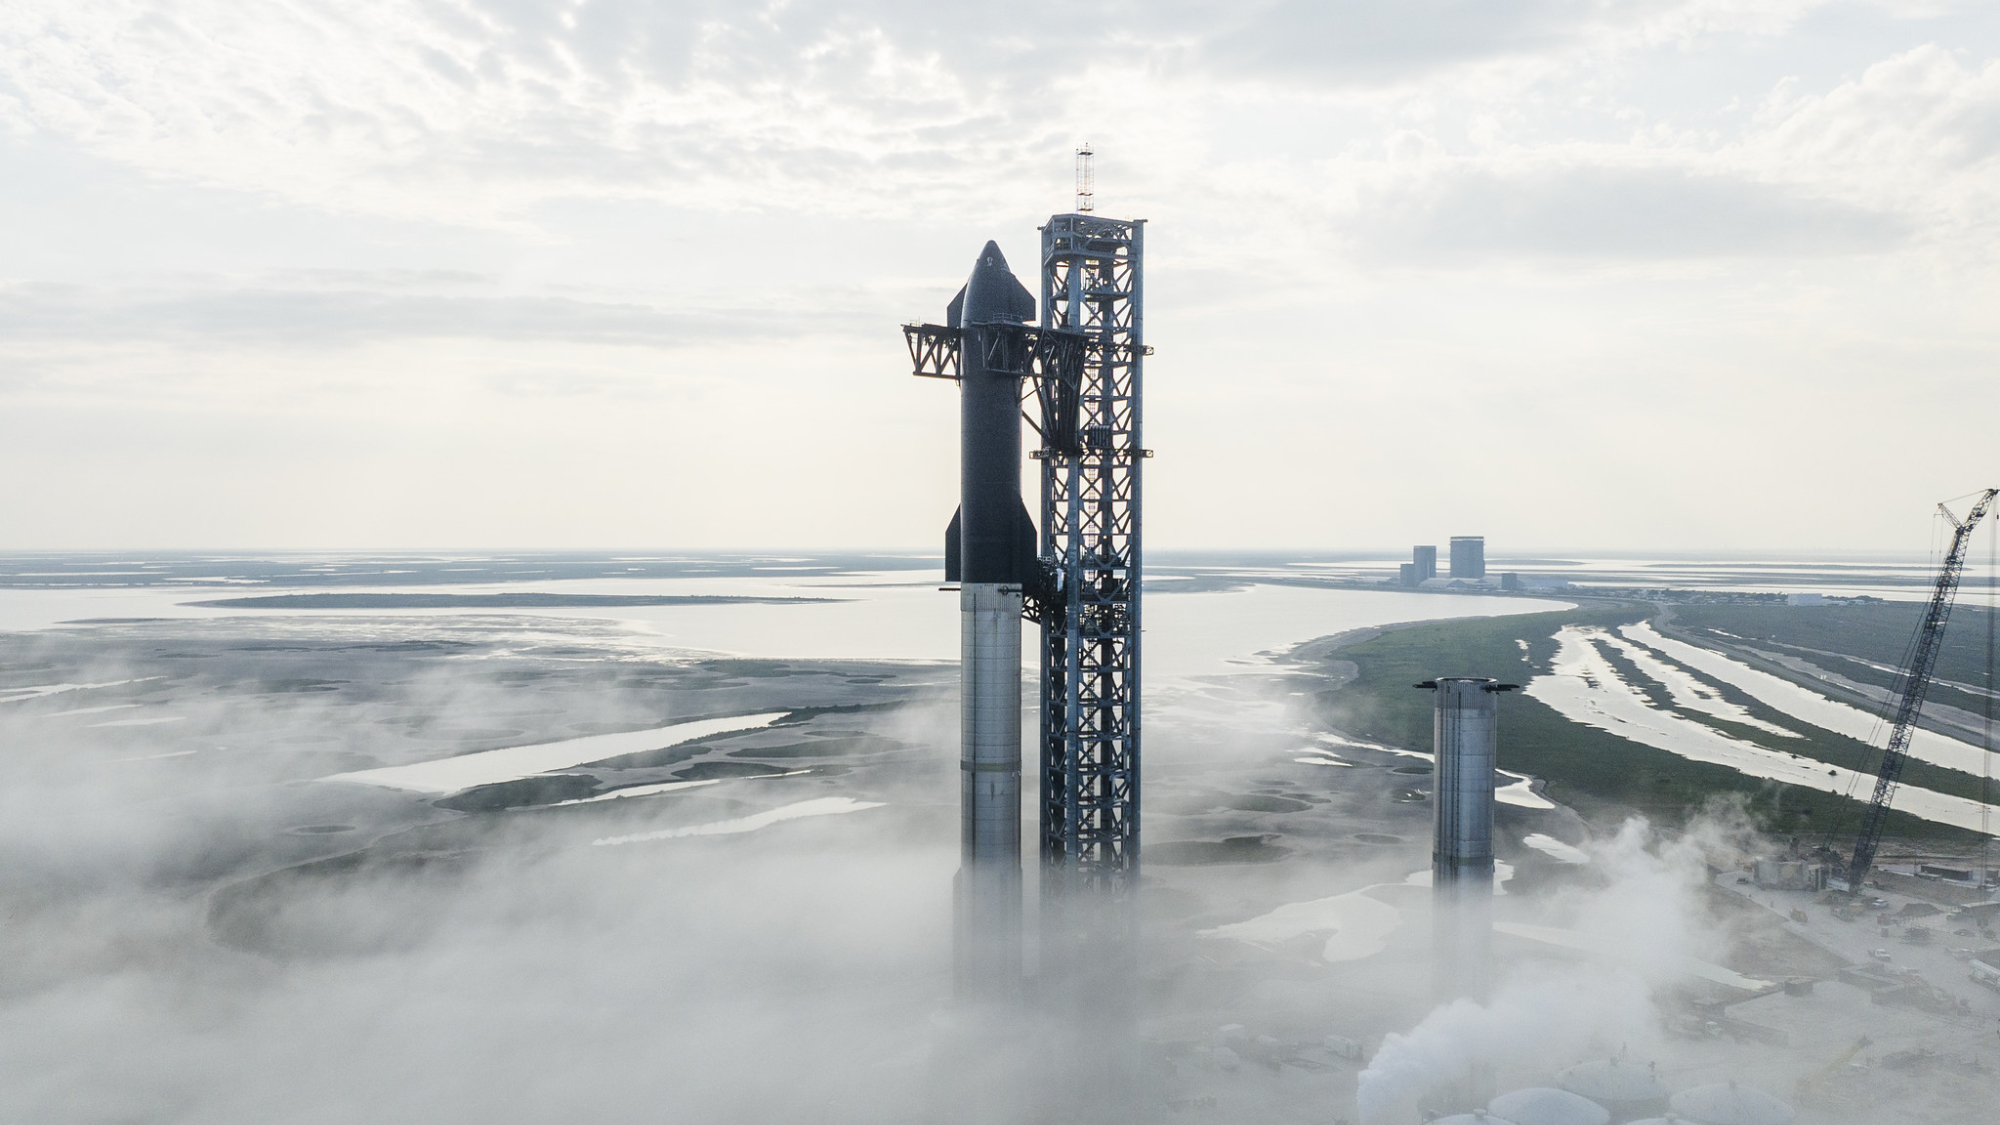 SpaceX posted this shot of its stacked Starship vehicle on Twitter on Jan. 12, 2023.